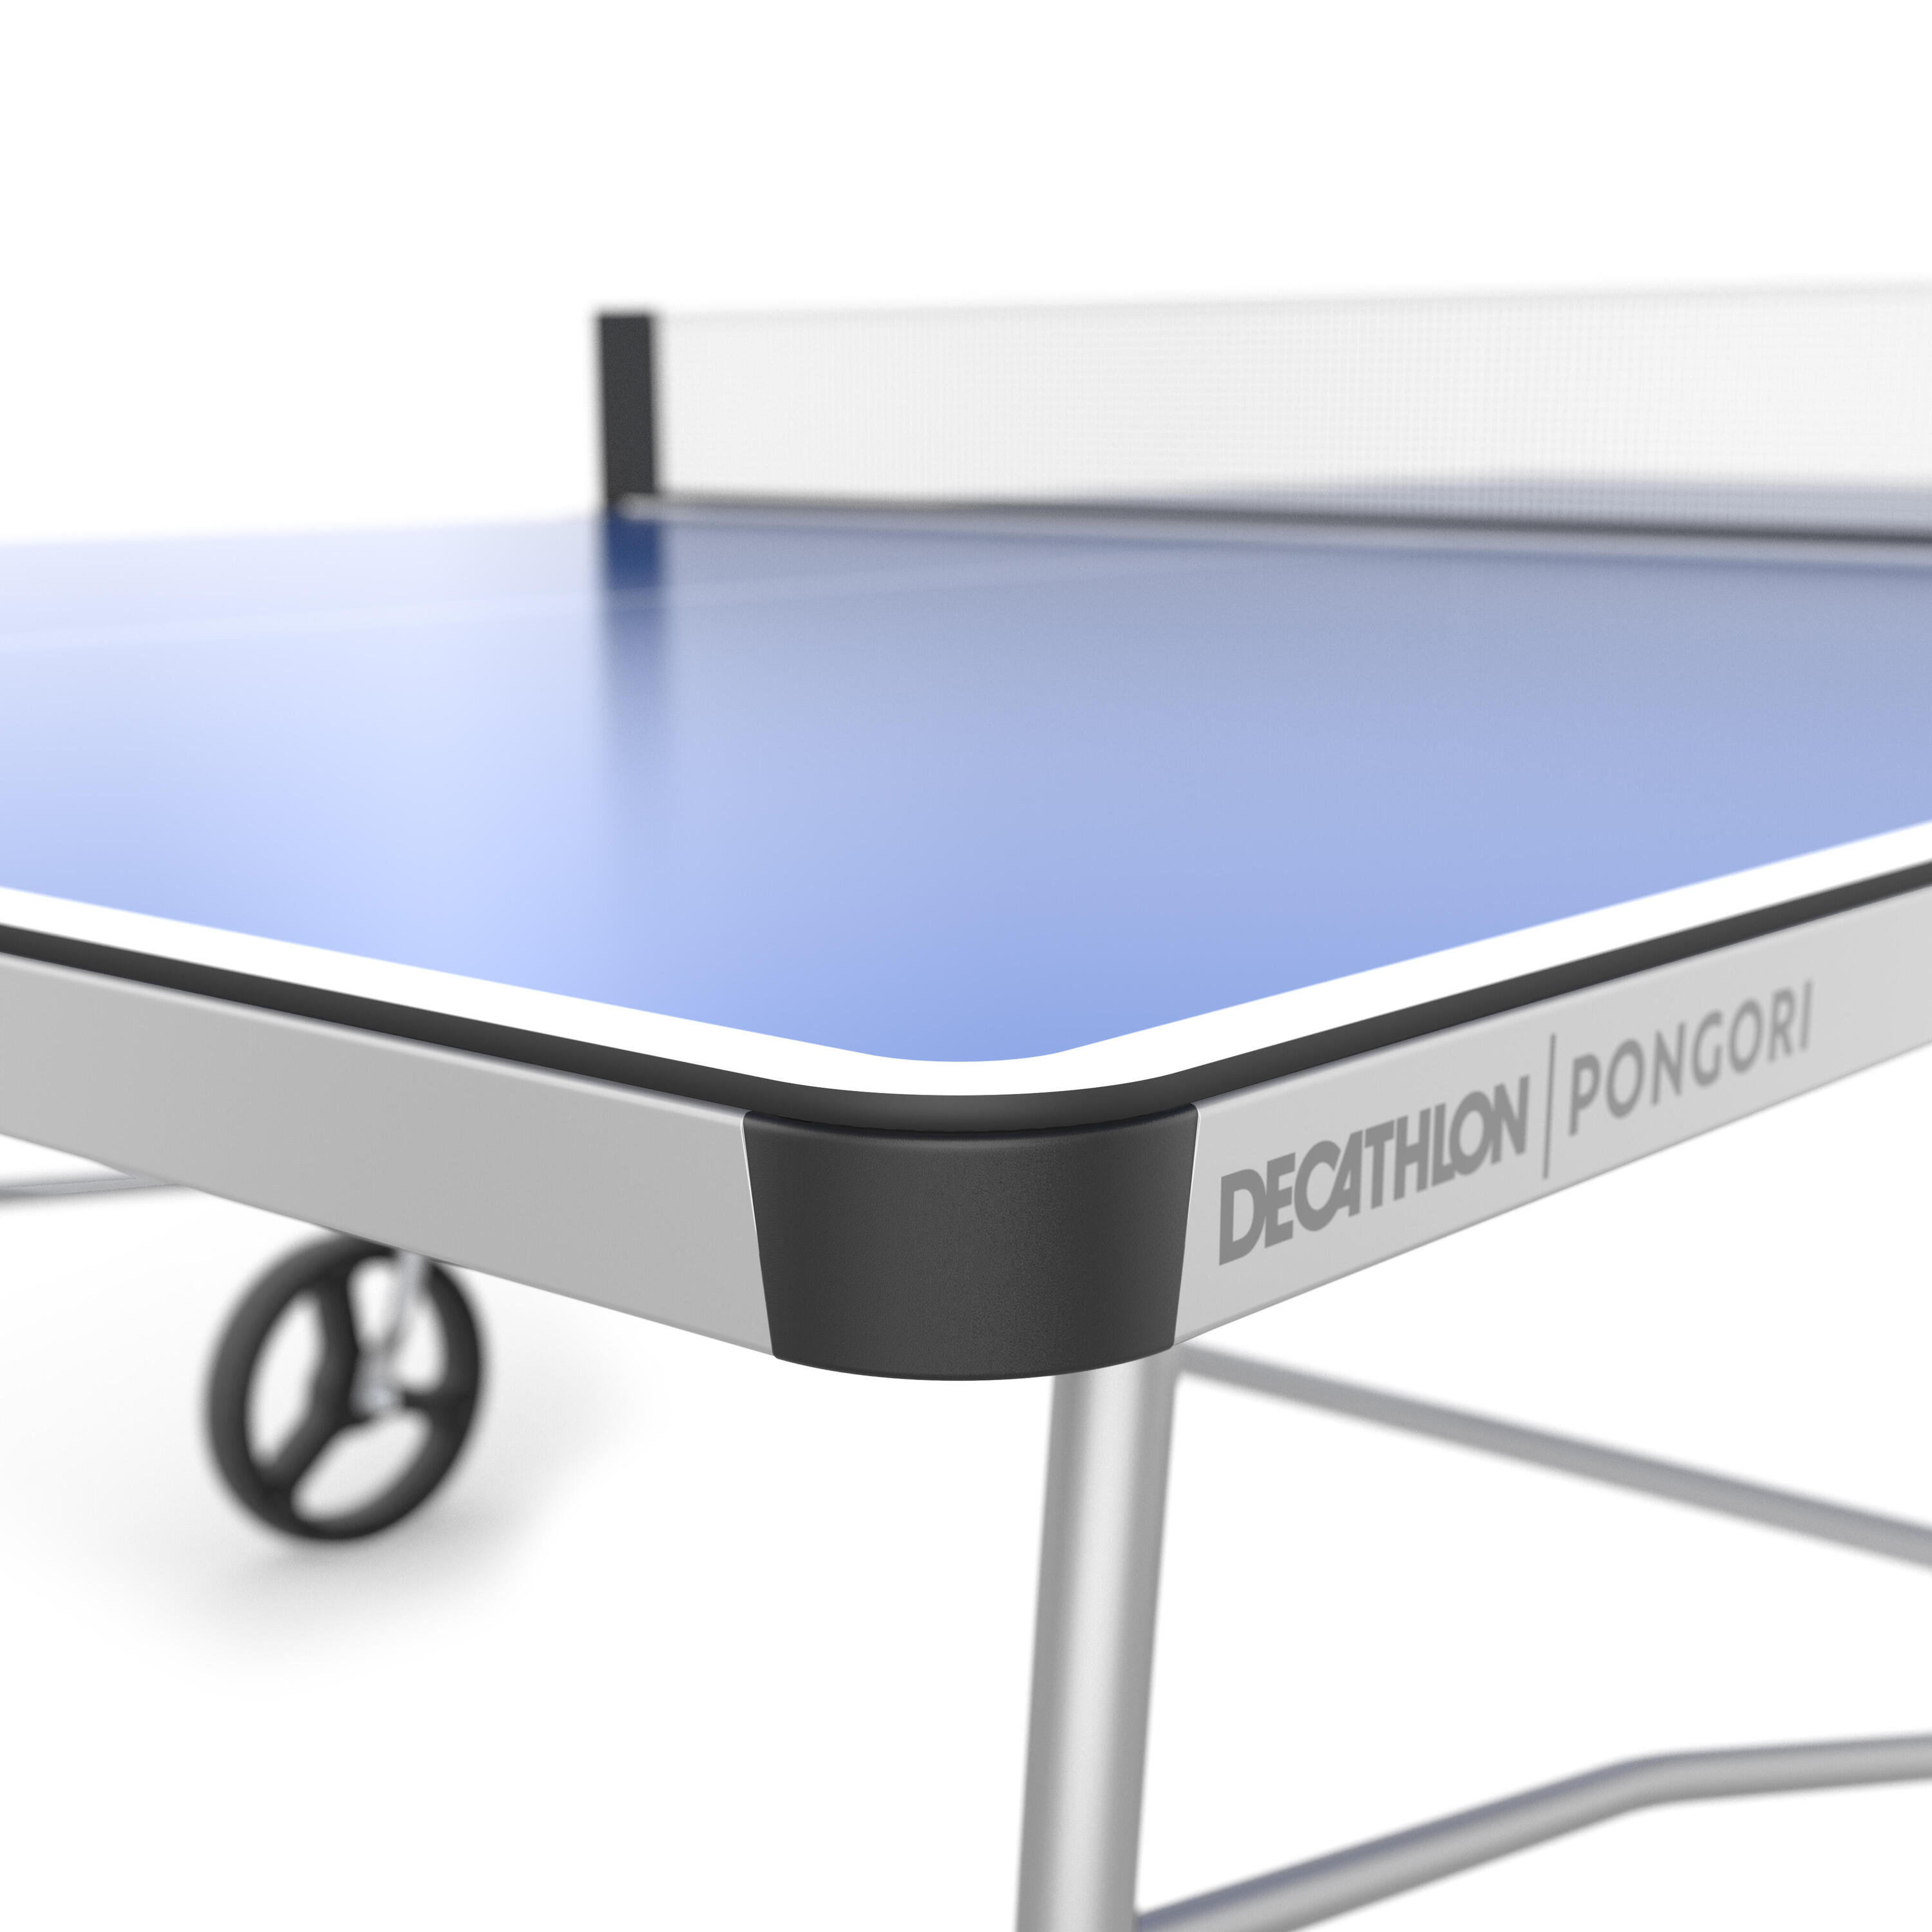 Outdoor Table Tennis Table PPT 500.2 - Blue 7/14